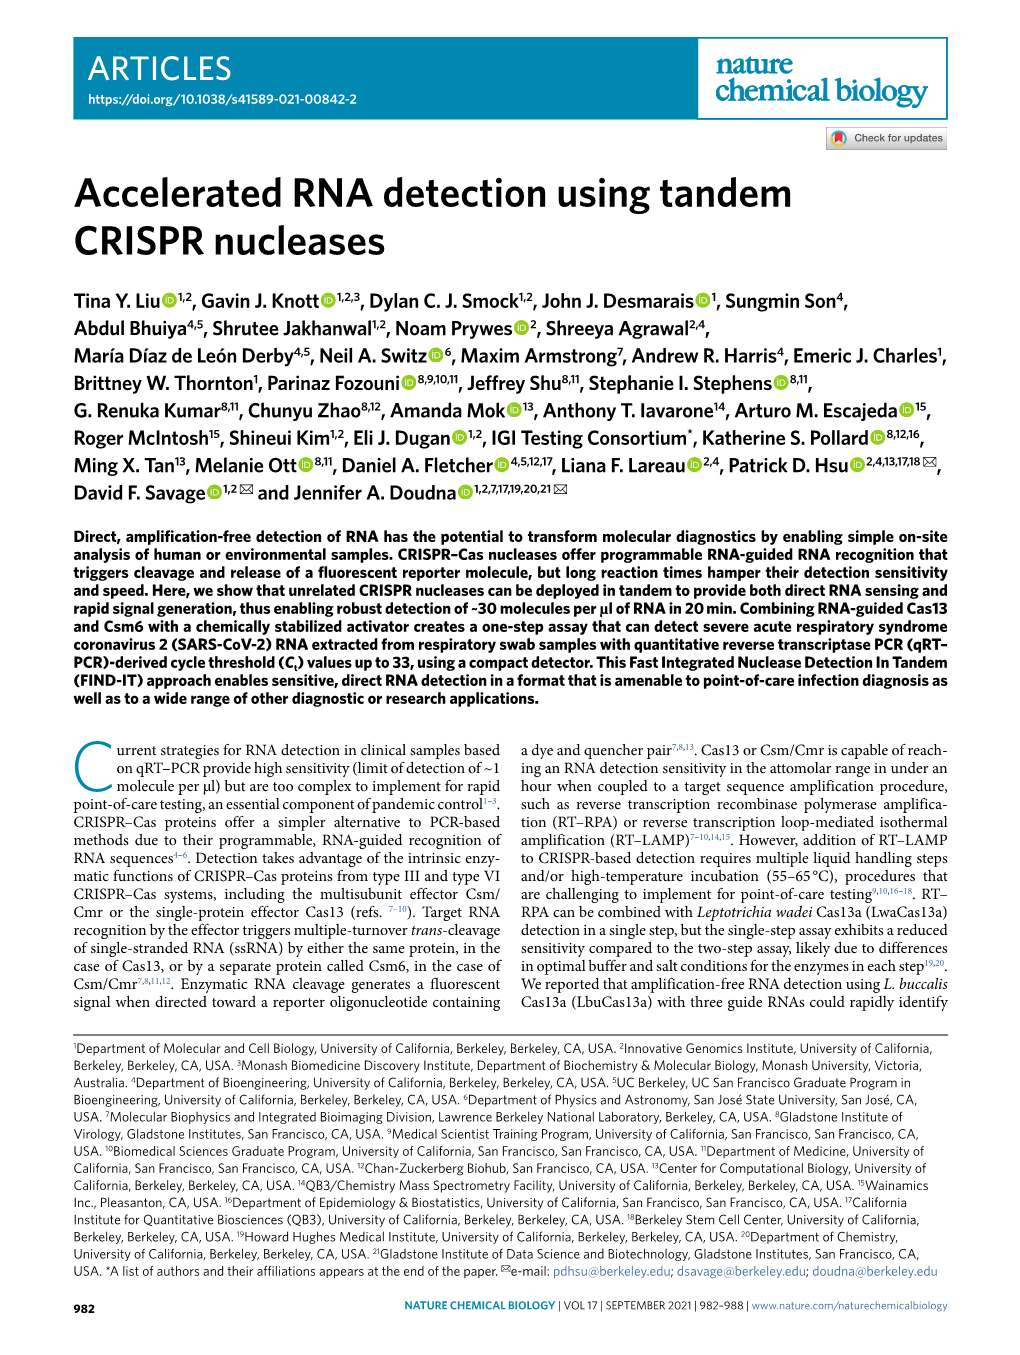 Accelerated RNA Detection Using Tandem CRISPR Nucleases